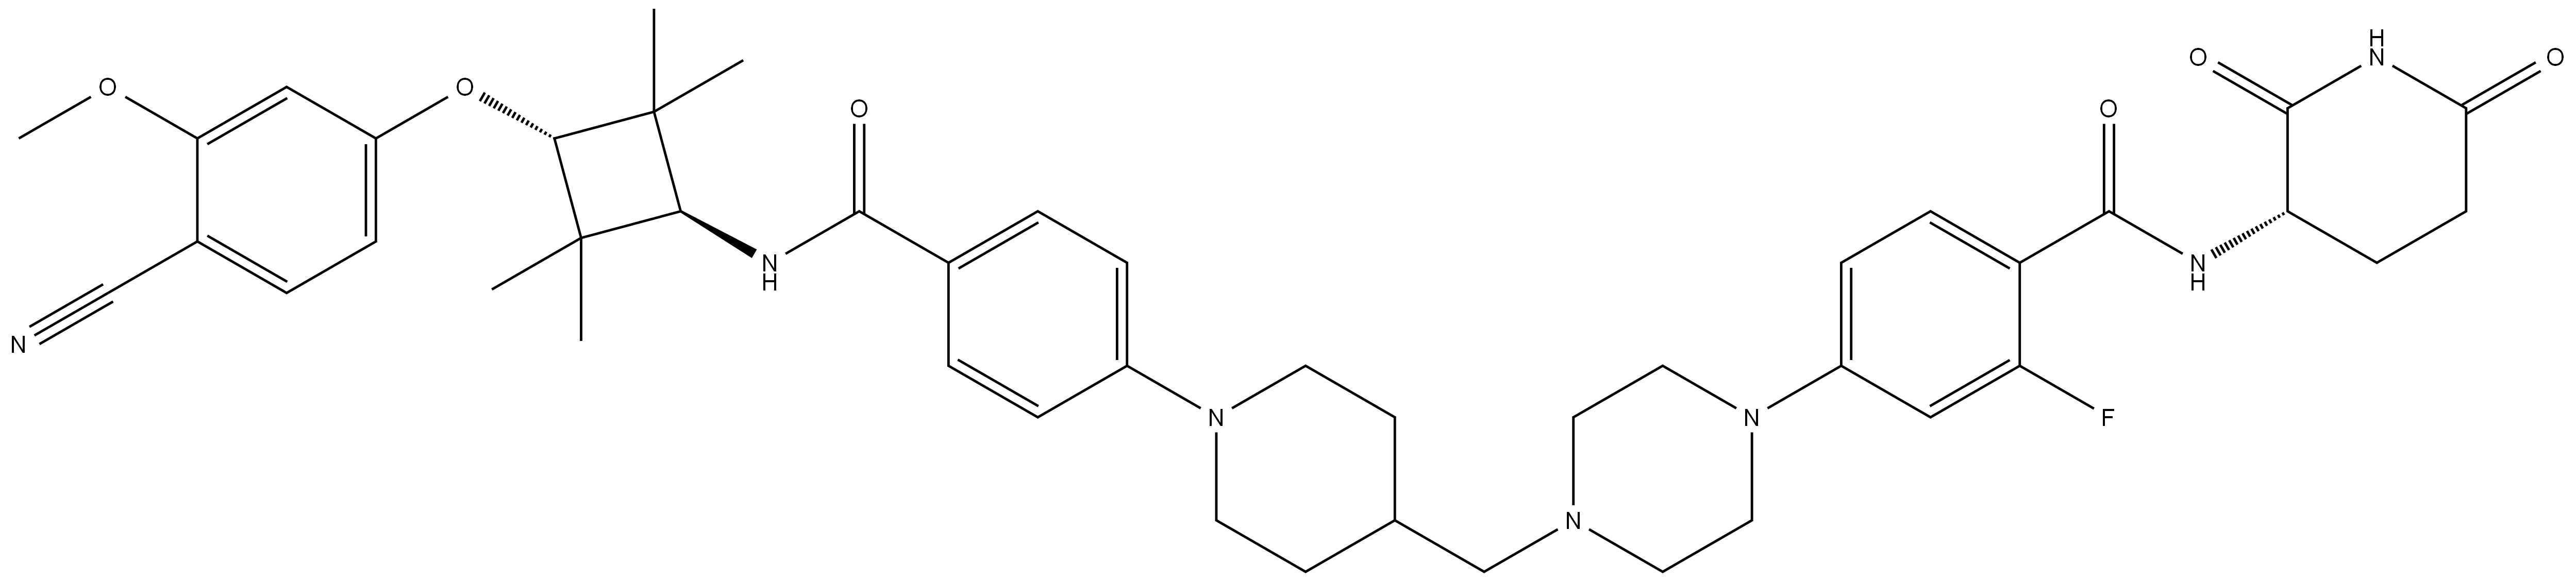 Luxdegalutamide Chemical Structure